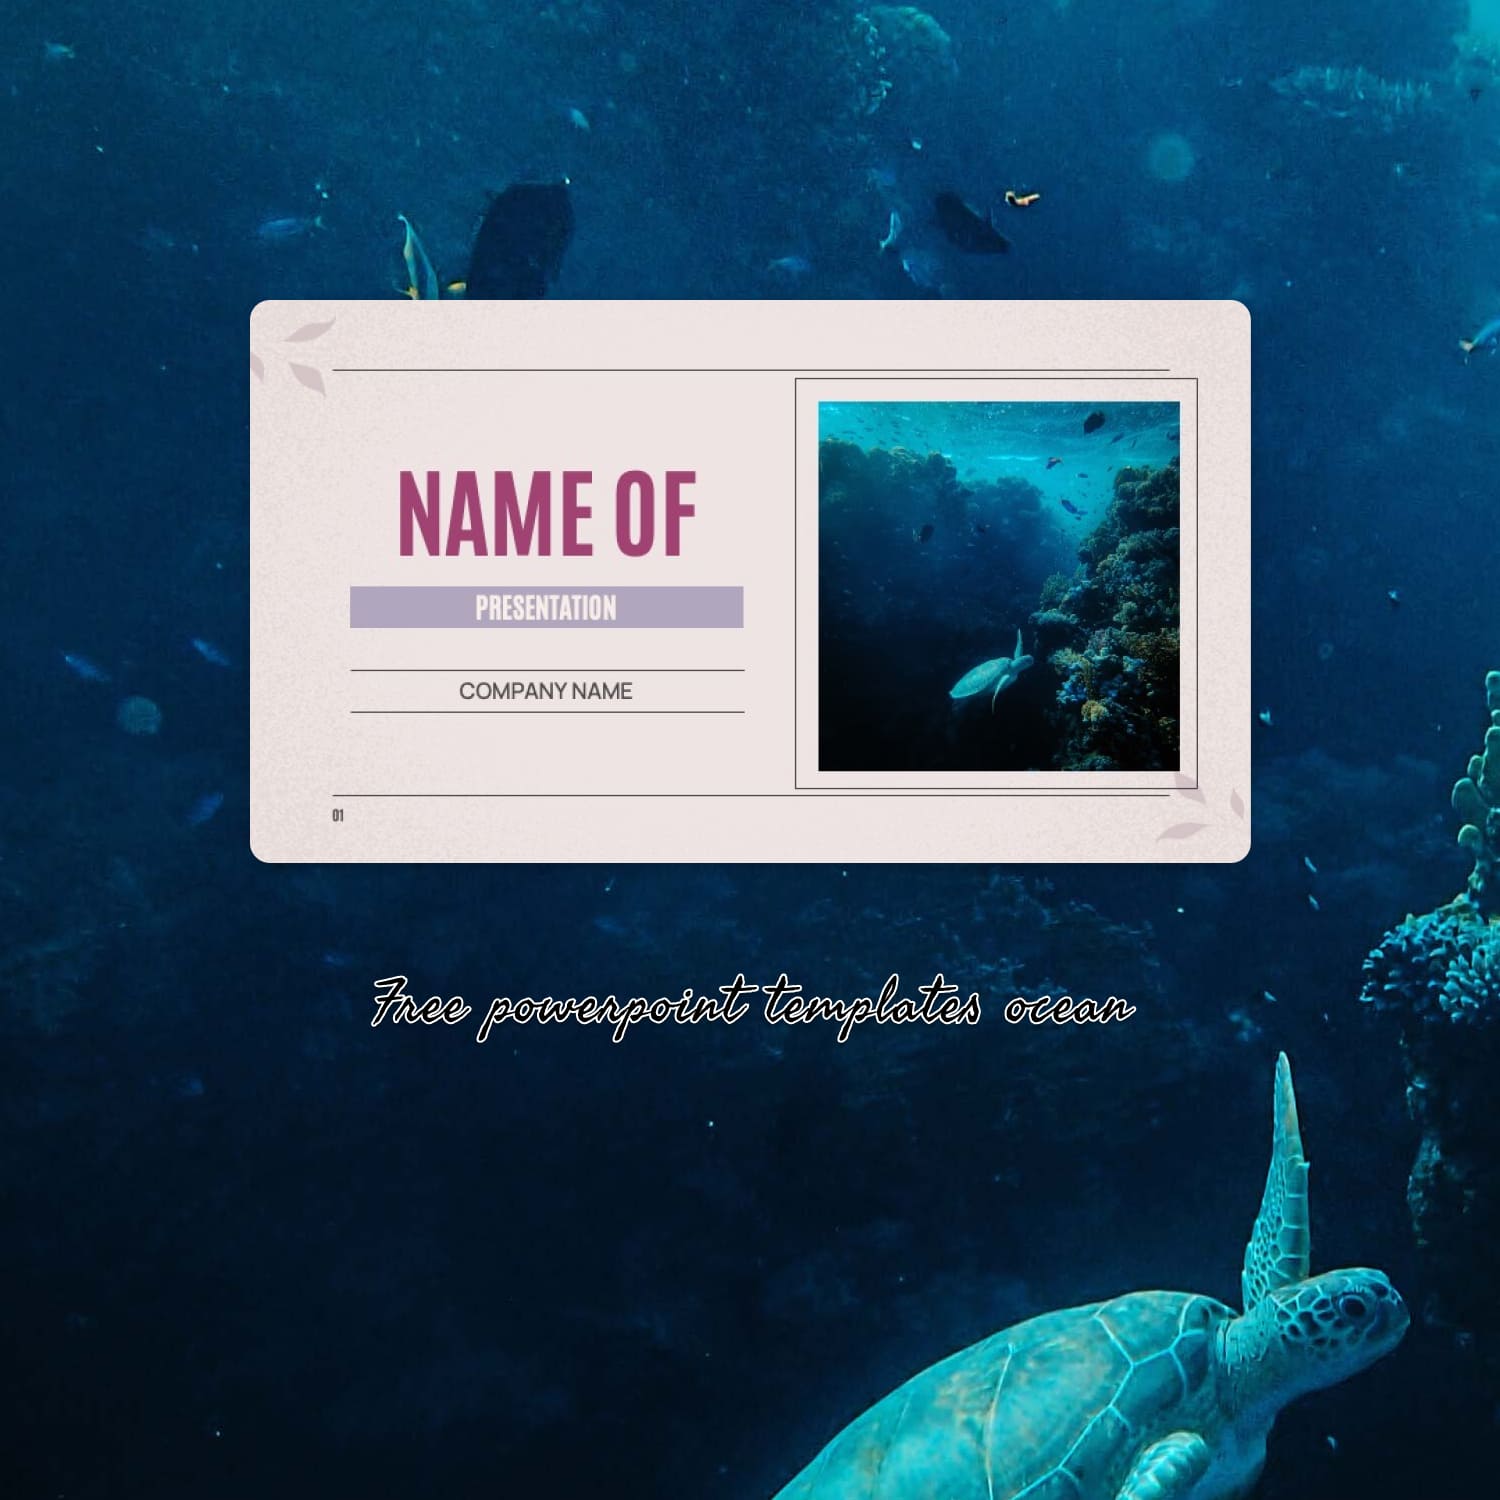 Free powerpoint templates ocean - main image preview.